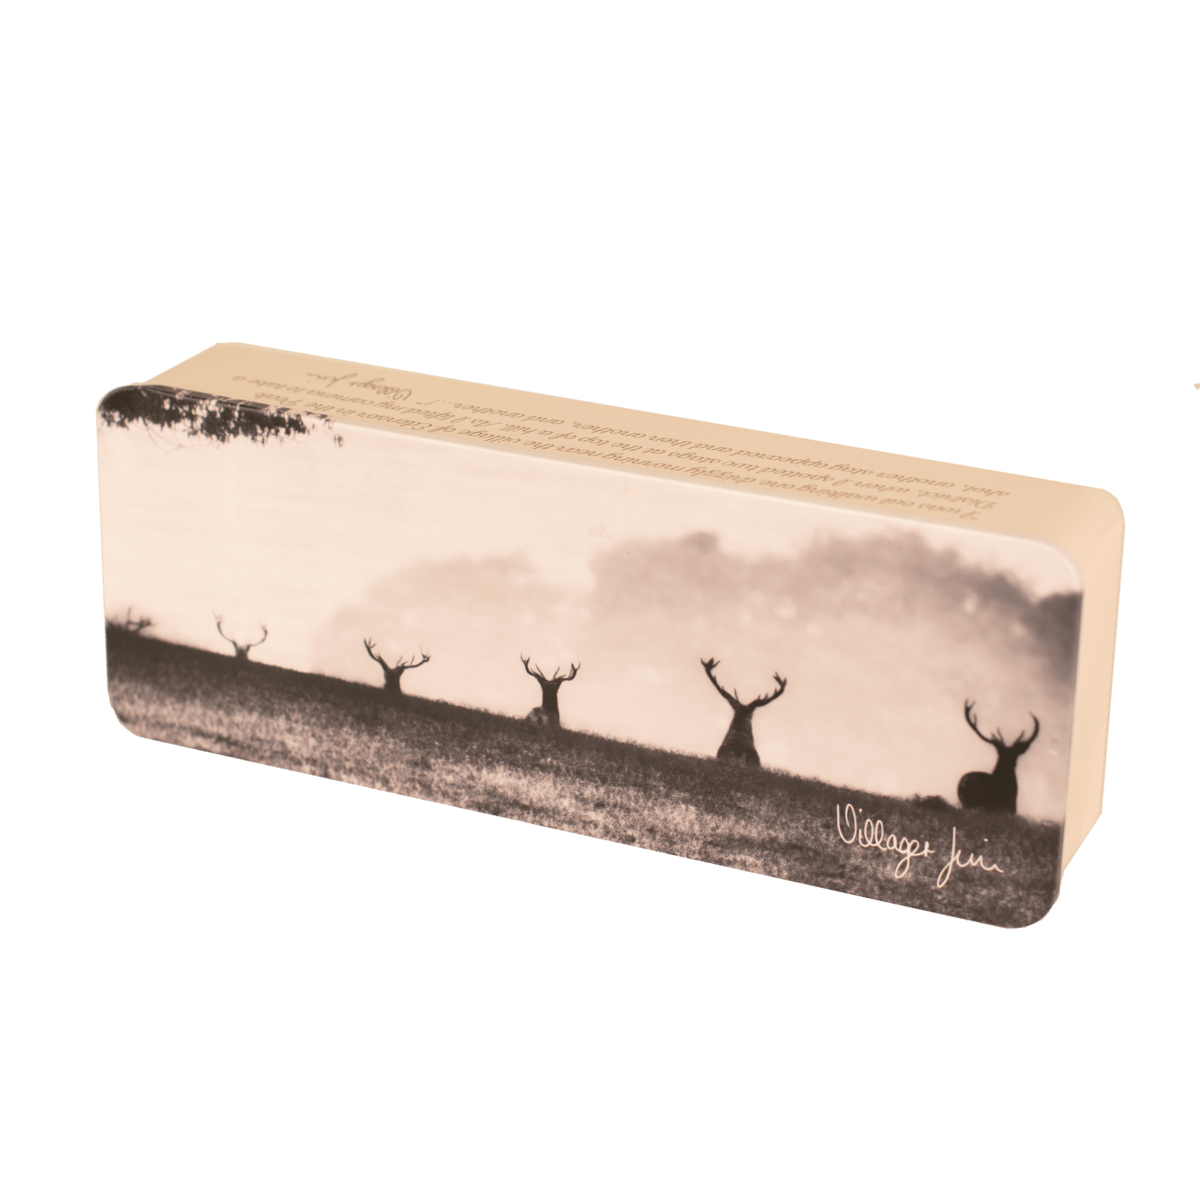 Villager Jim "Ascent of the Stag" All Butter Shortbread Squares 180g